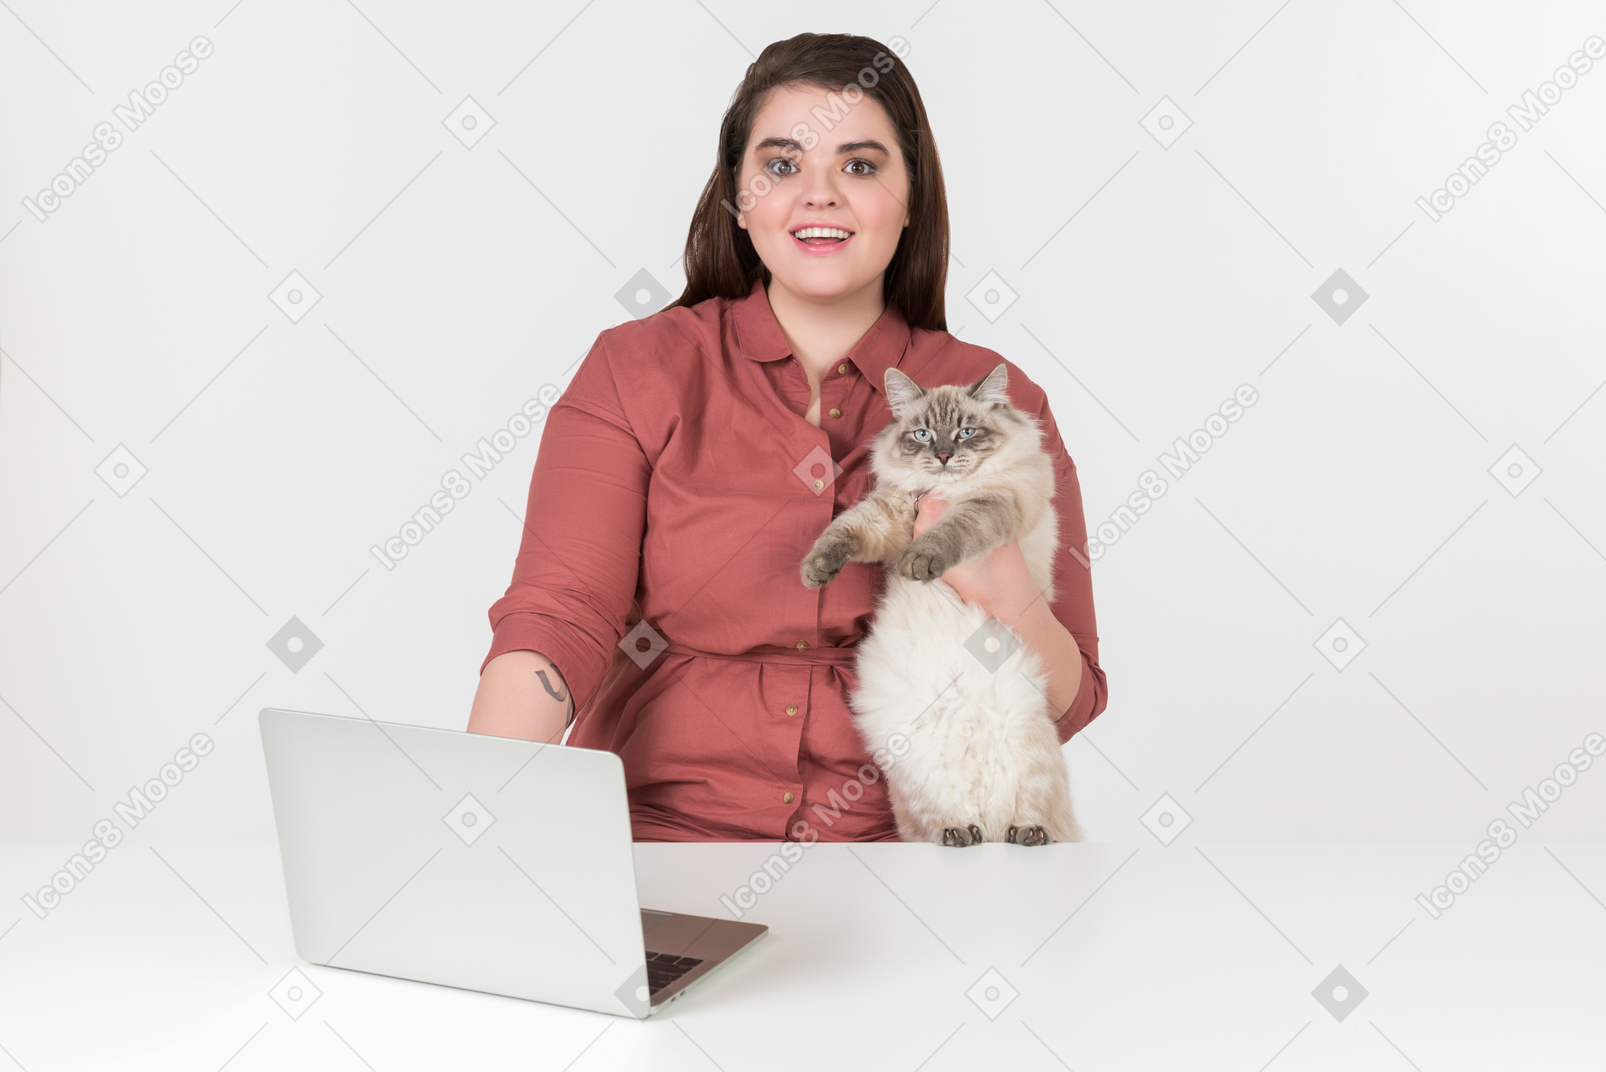 Surfing in the internet together with mr cat